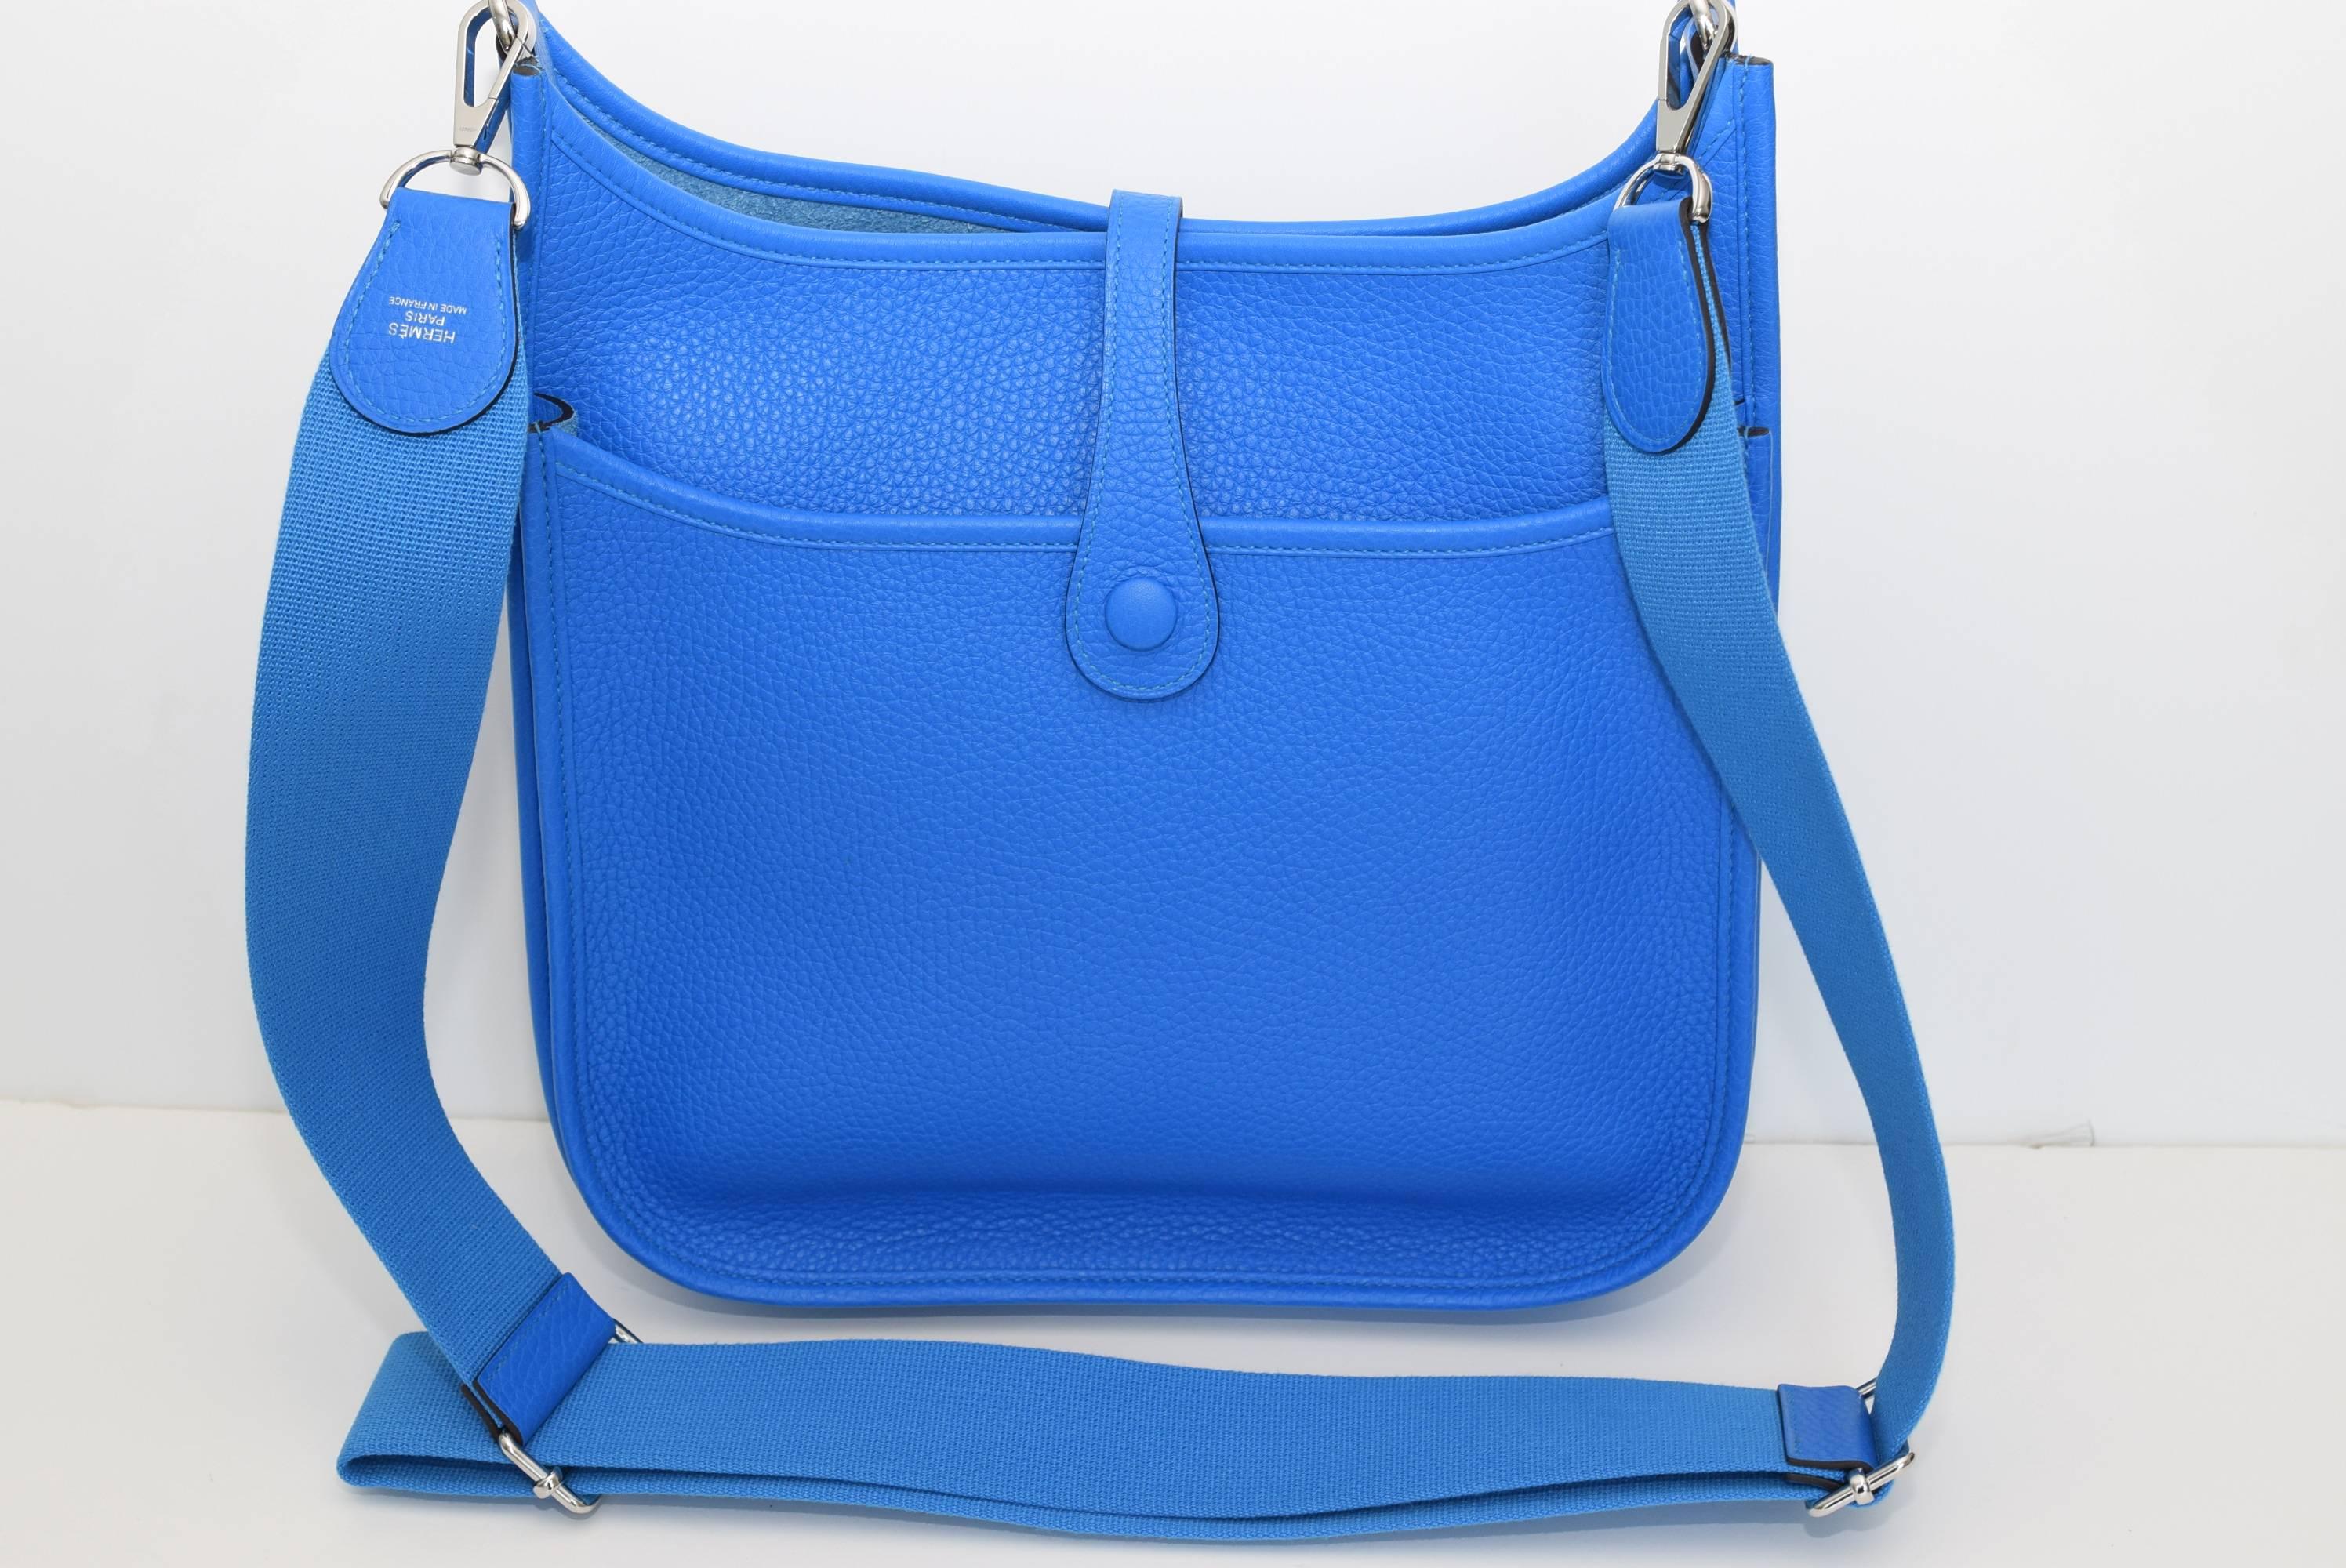 Brand New with TAGS!! 2016 Hermes Evelyn III in Hydra Blue. Beautiful Clemence leather and this is the PM size. Purchased in Europe in June 2016.  Never worn. 
Comes with Hermes Box, dust bags and original receipts. 
Made in France 
Free shipping